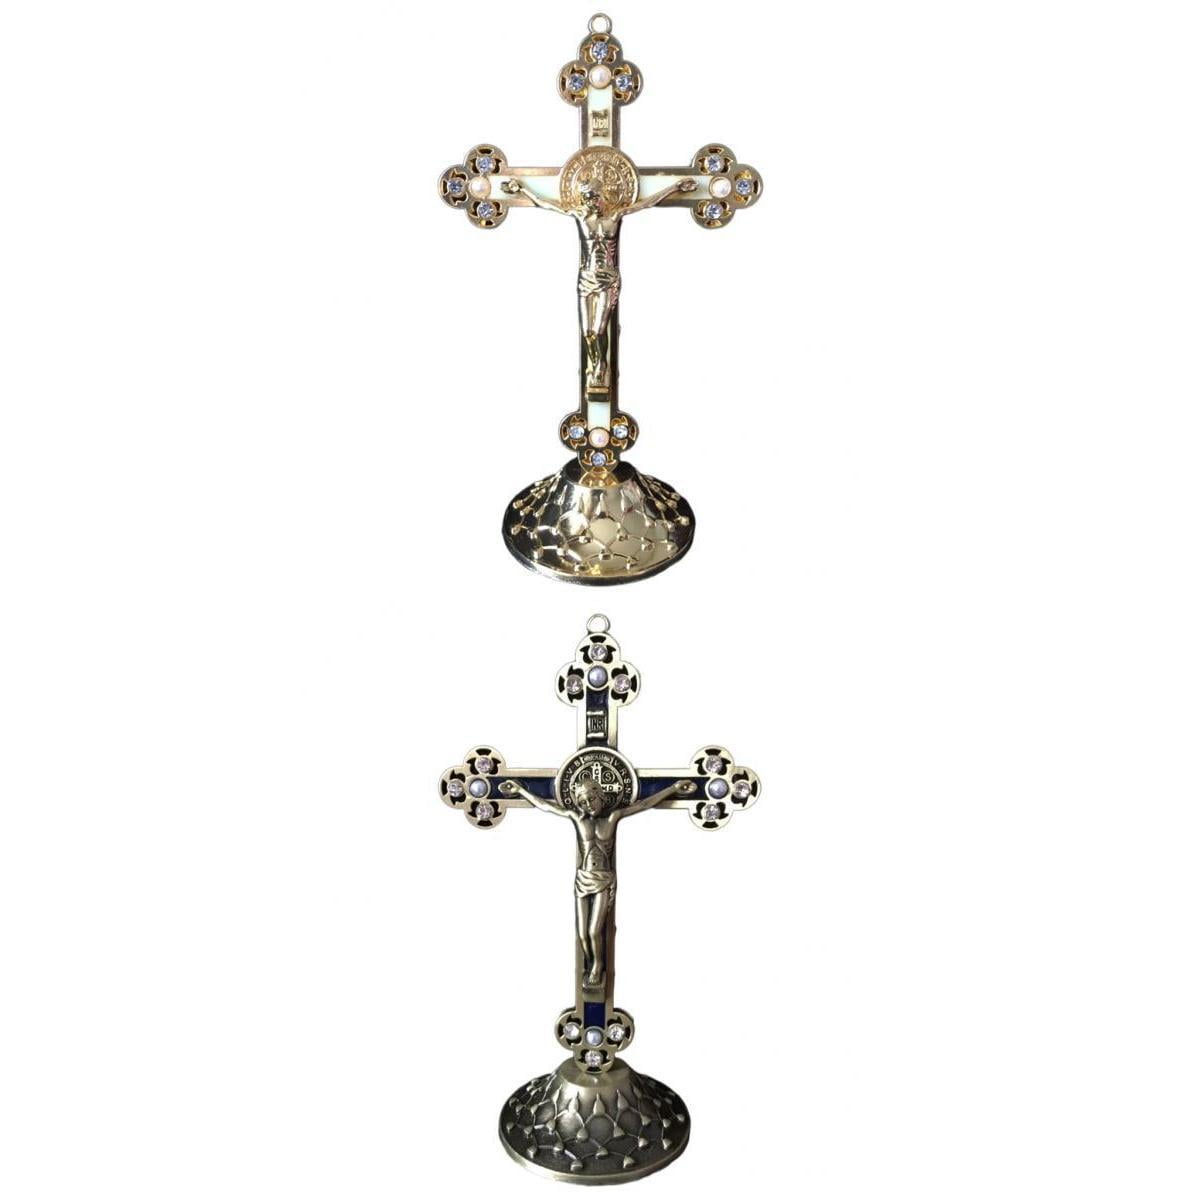 2PCS Crucifix Jesus Christ On The Stand Cross Figurine for Home Chapel Ornament